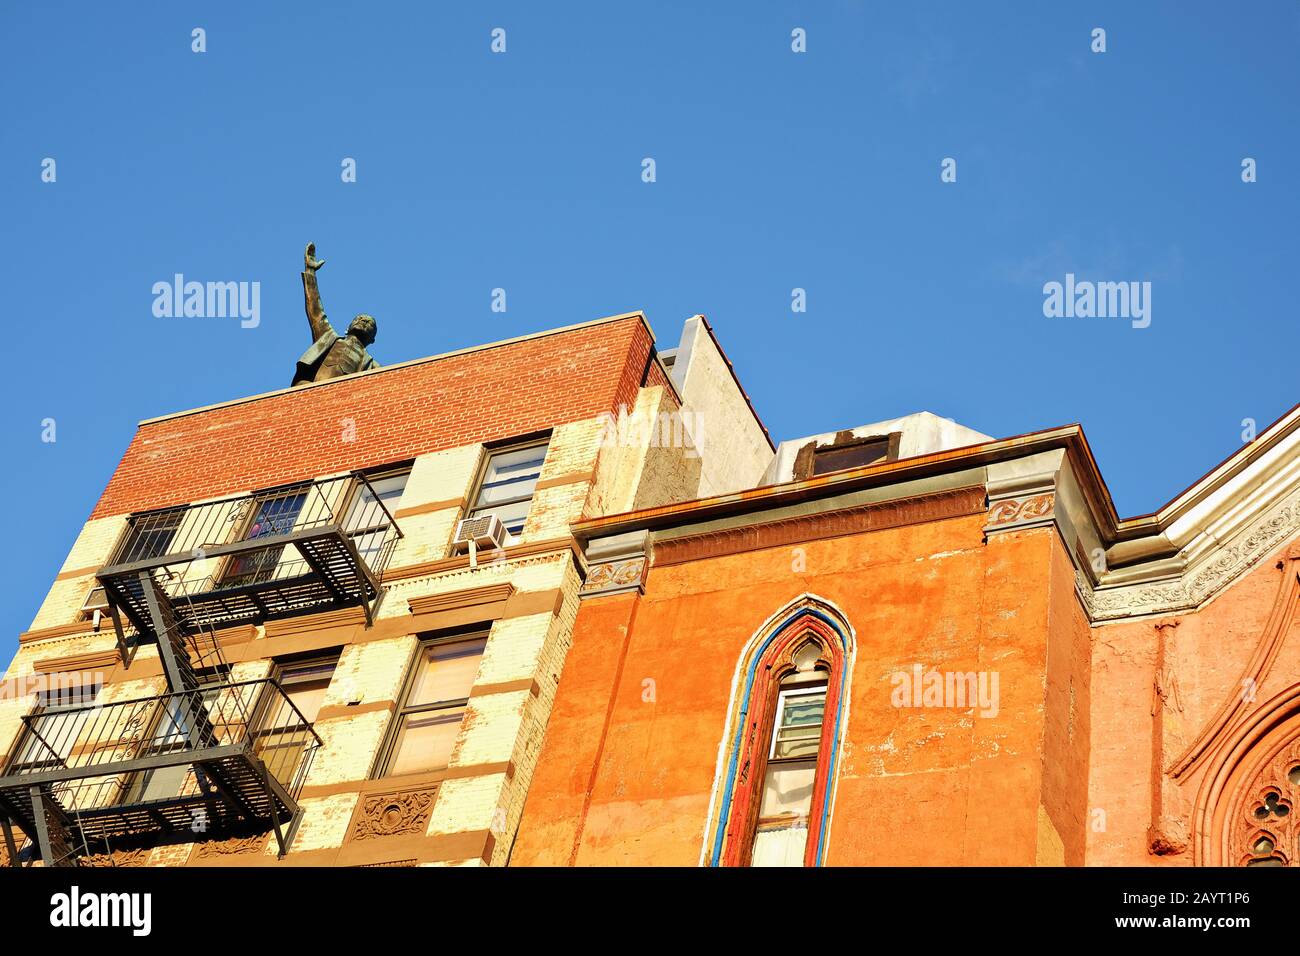 A statue of Comrade Vladimir Lenin greets American people from the rooftop of a tenement building in Greenwich Village, New York City Stock Photo